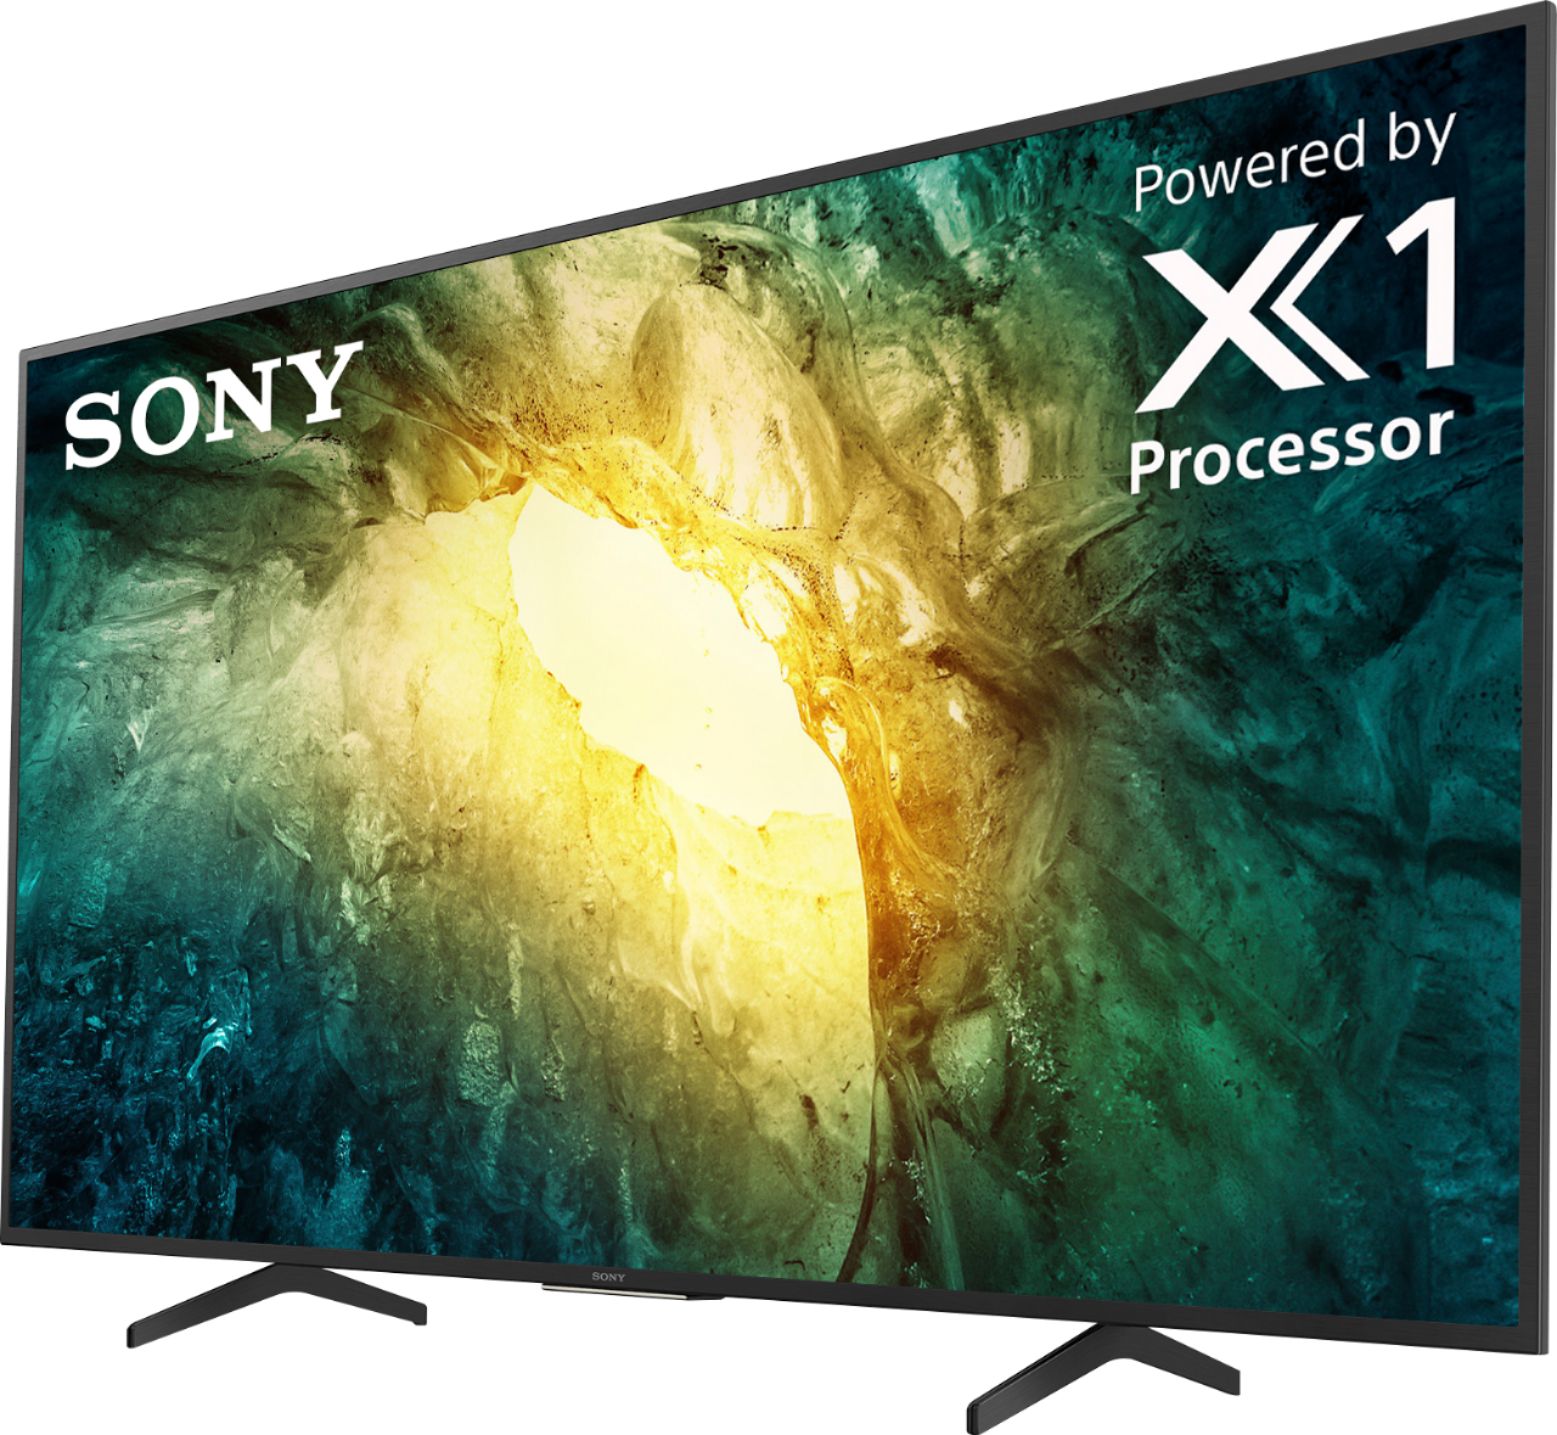 Left View: Sony - 75" Class X750H Series LED 4K UHD Android TV